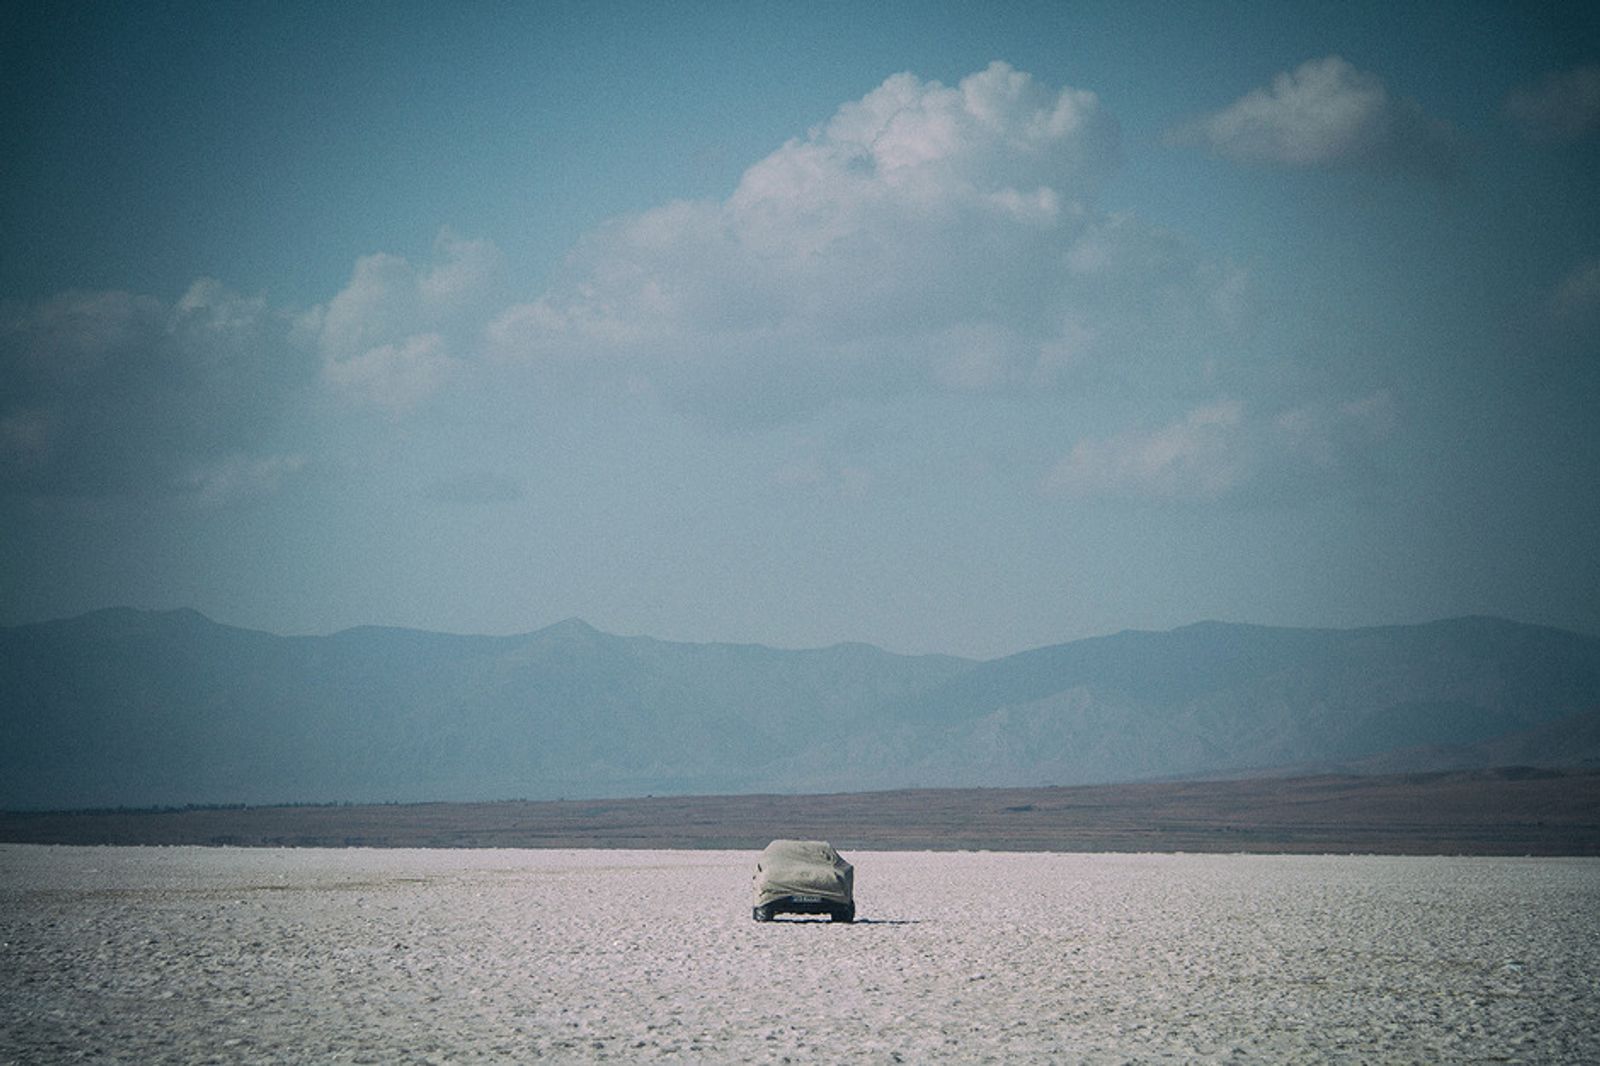 © Farshid Tighehsaz - A parked car belonging to a family that have come to see the lake. On 24 August 2011.